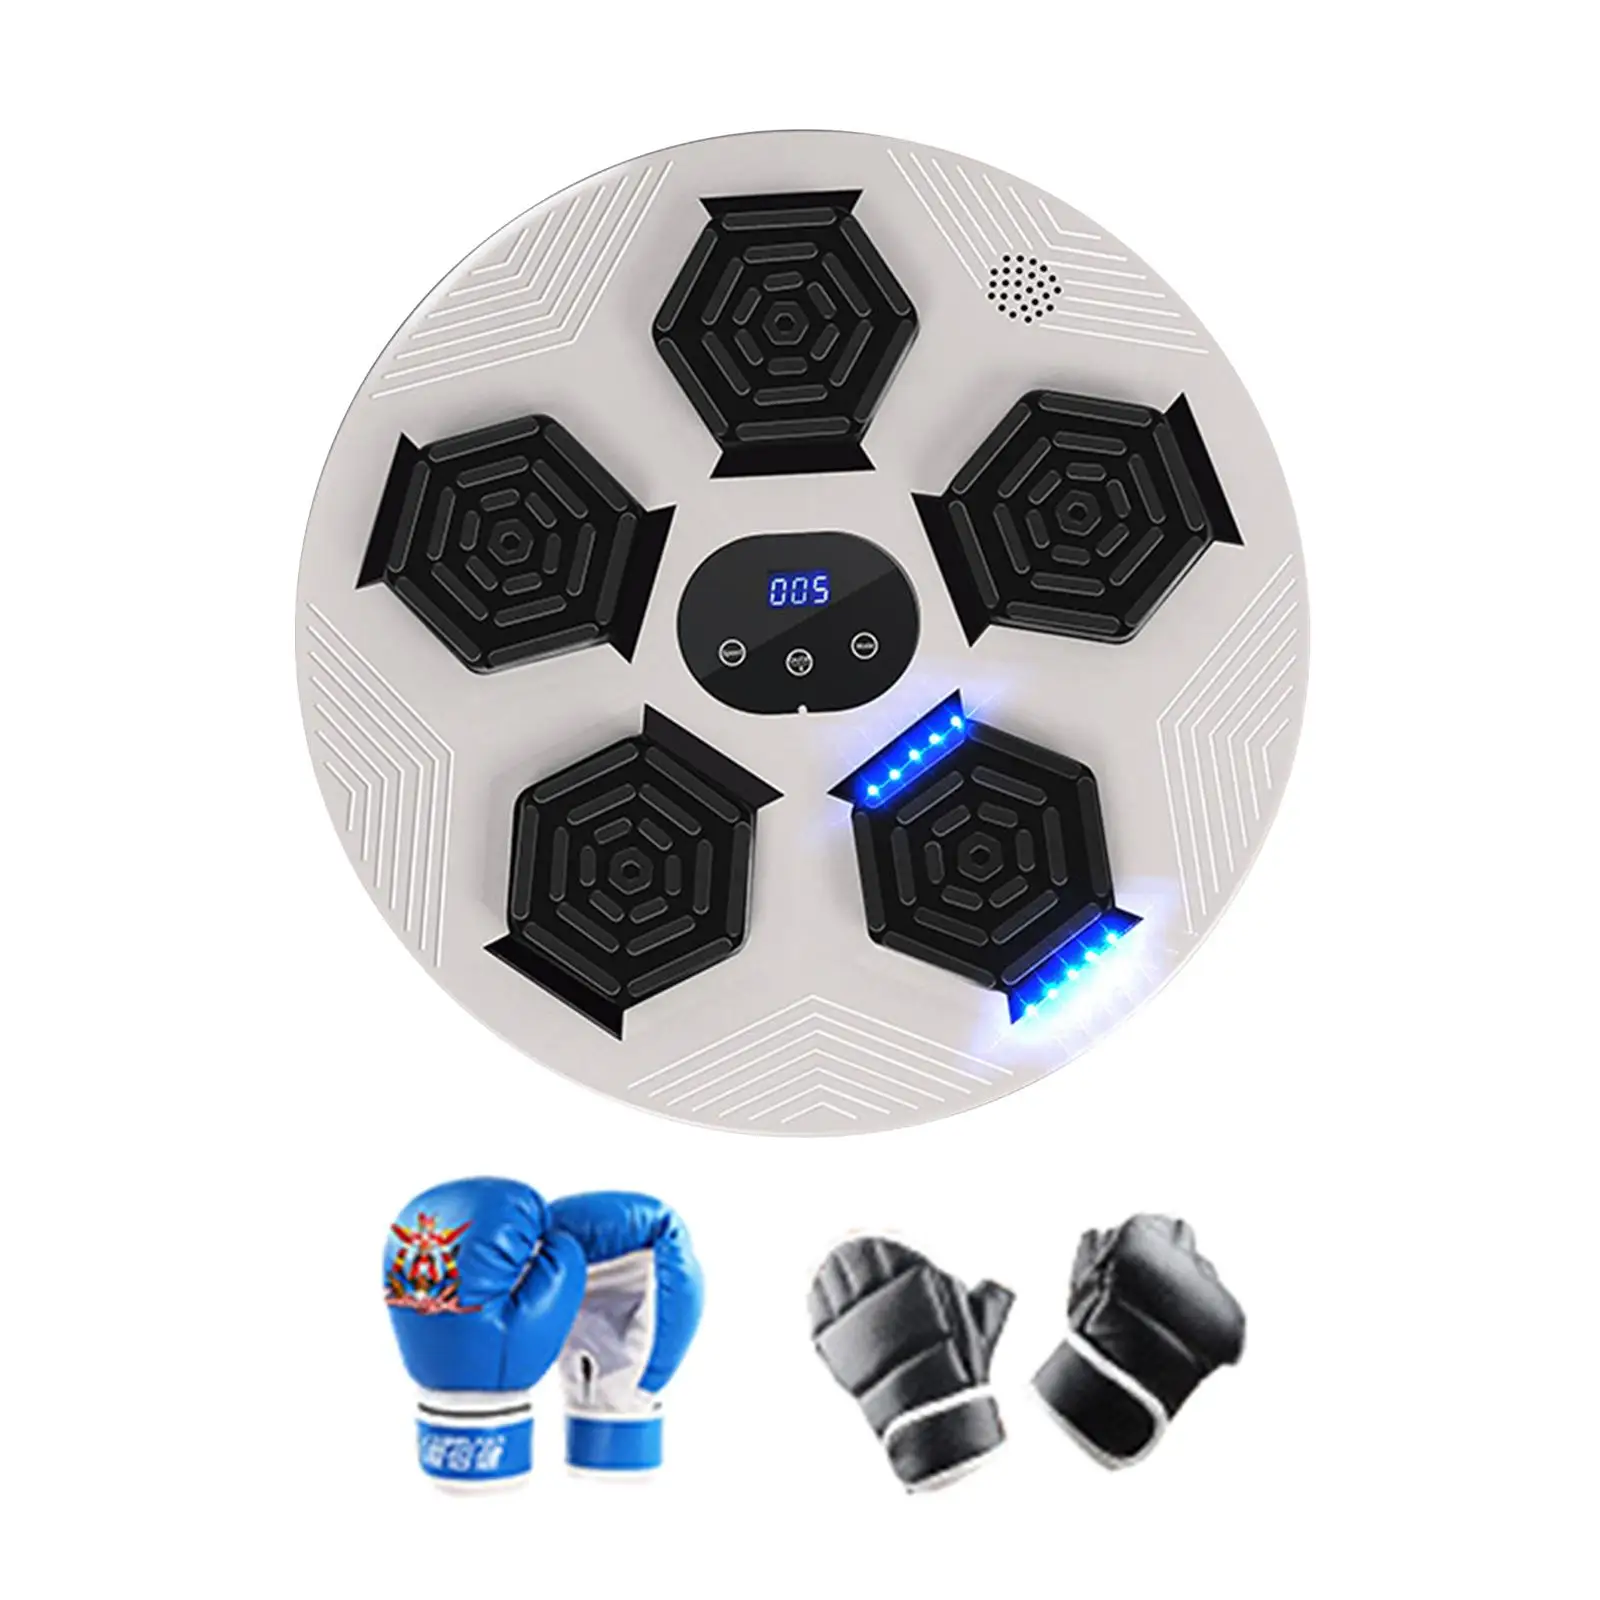 Smart Music Boxing Machine Martial Arts with Boxing Gloves Workout Exercise Wall Mounted Rhythm Musical Target Improves Agility